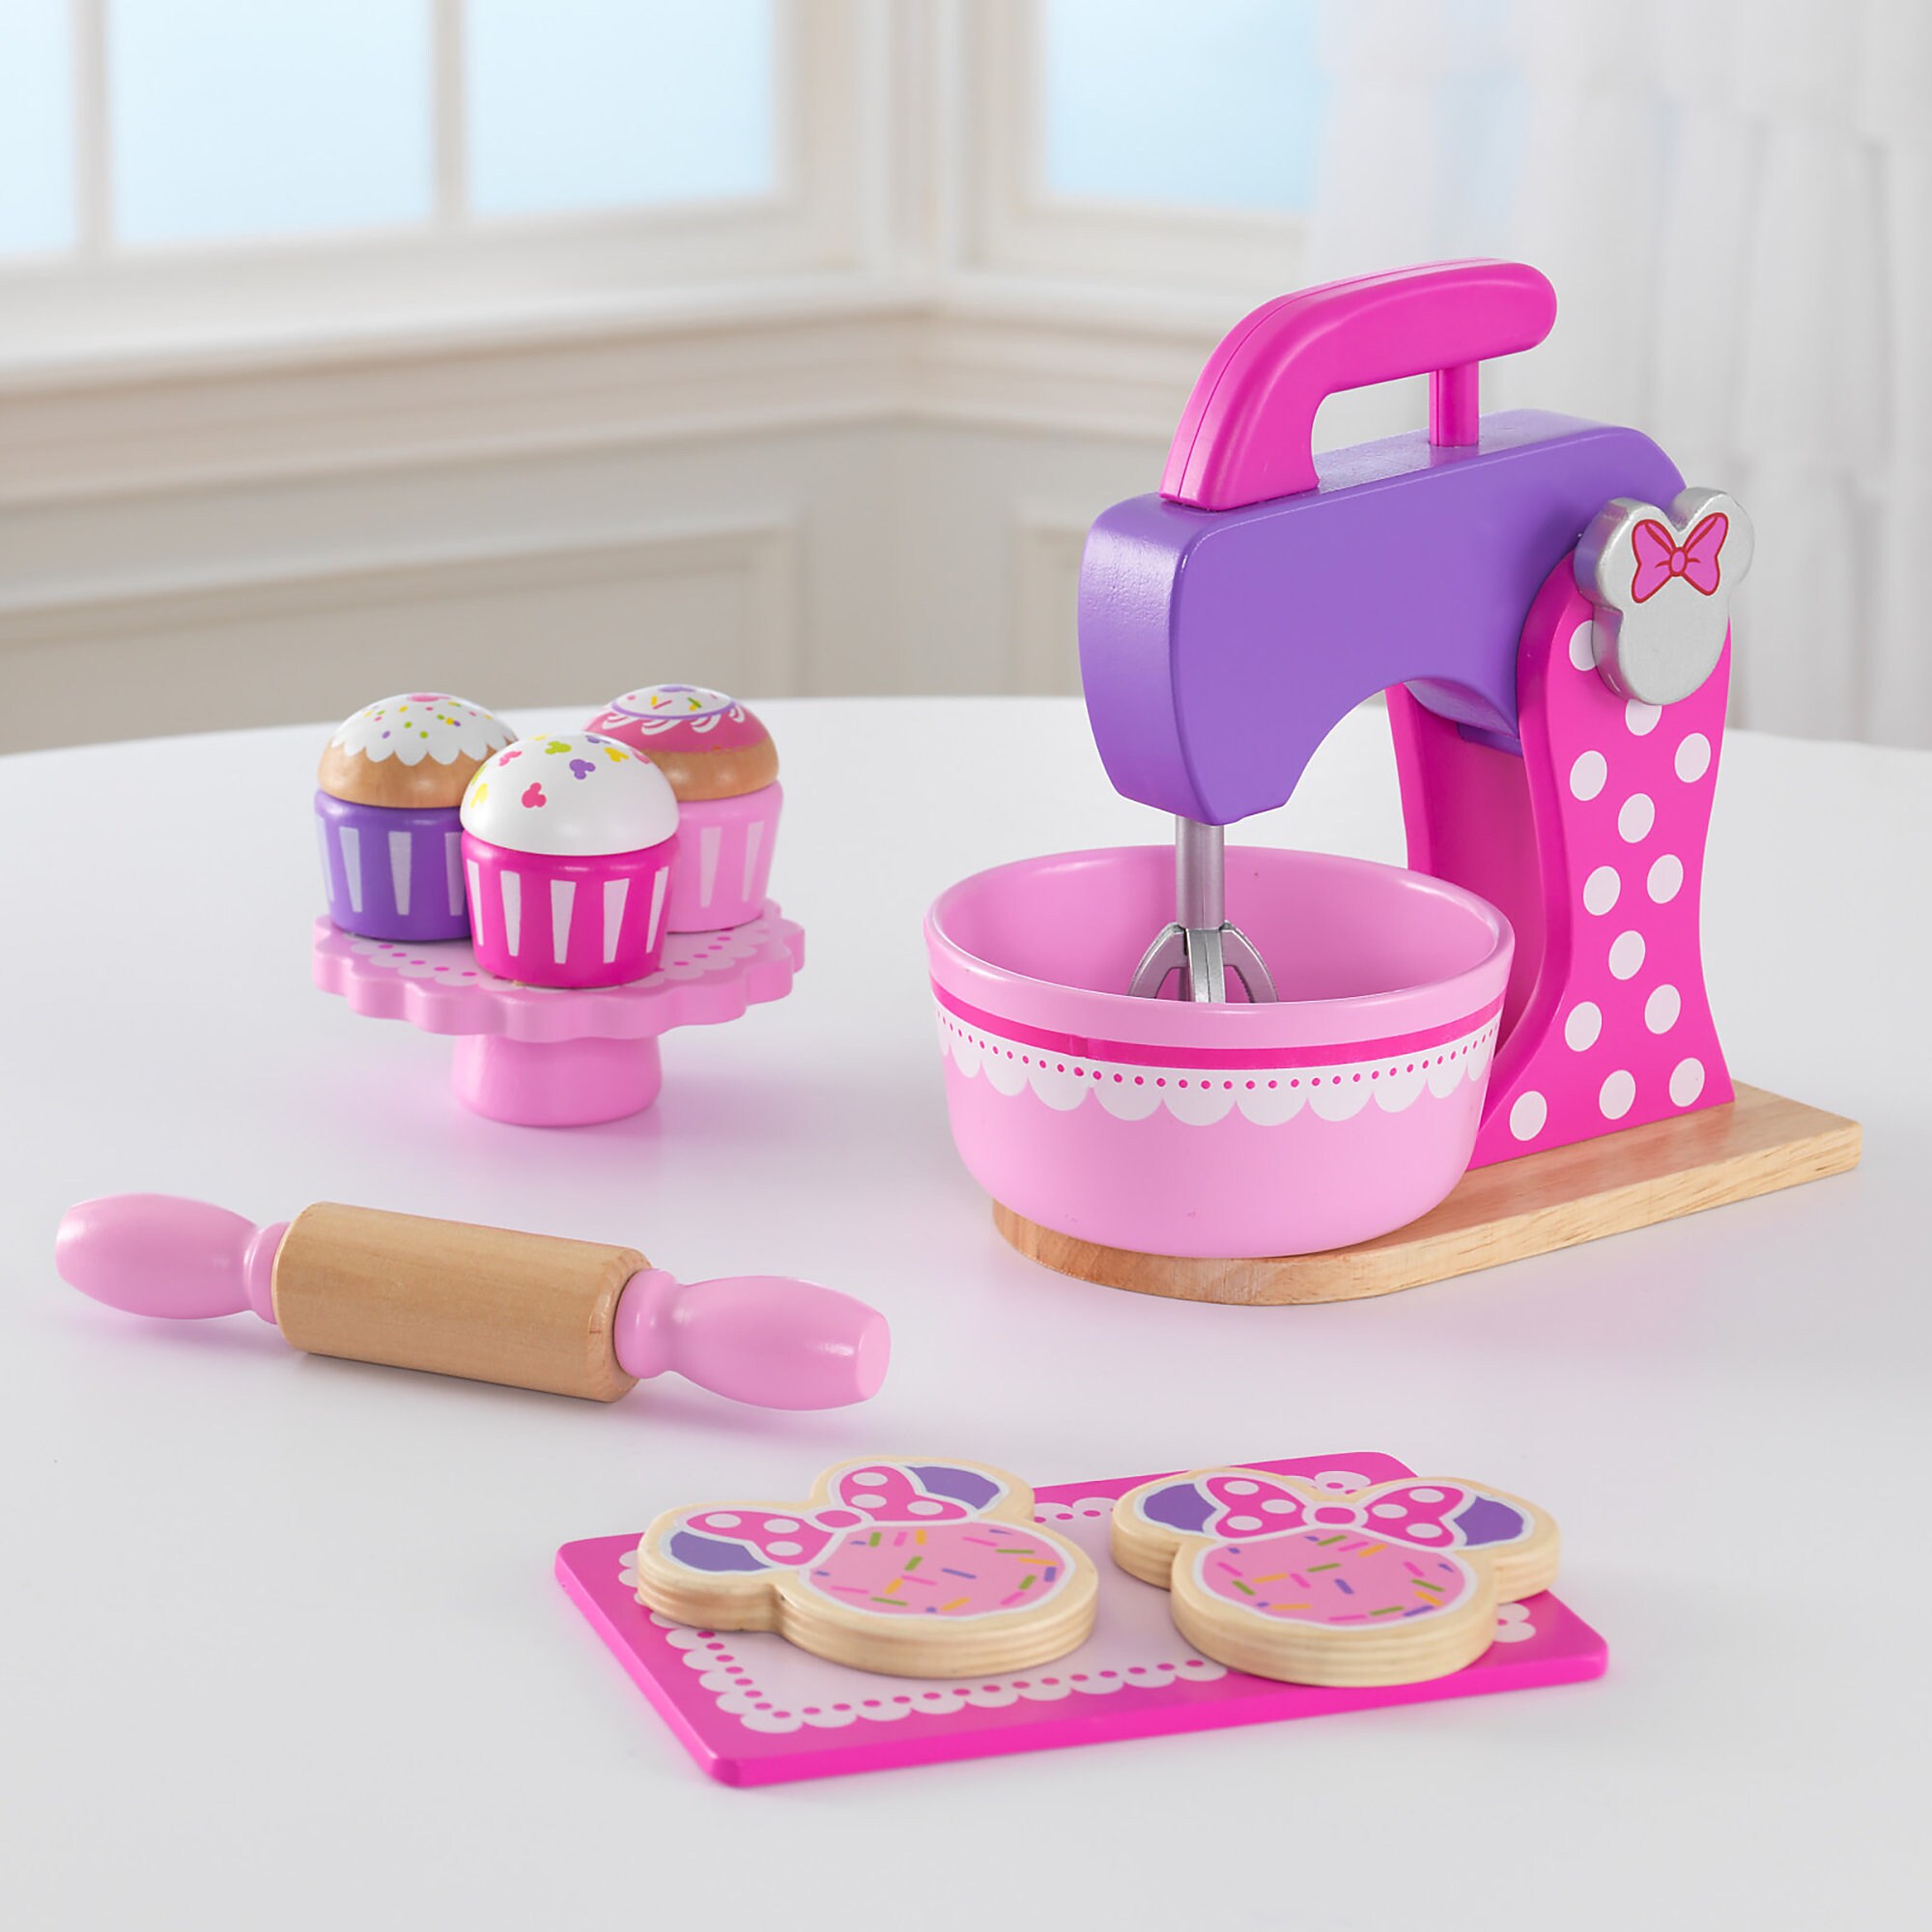 Minnie Mouse Baking and Treats Set by KidKraft - Pink